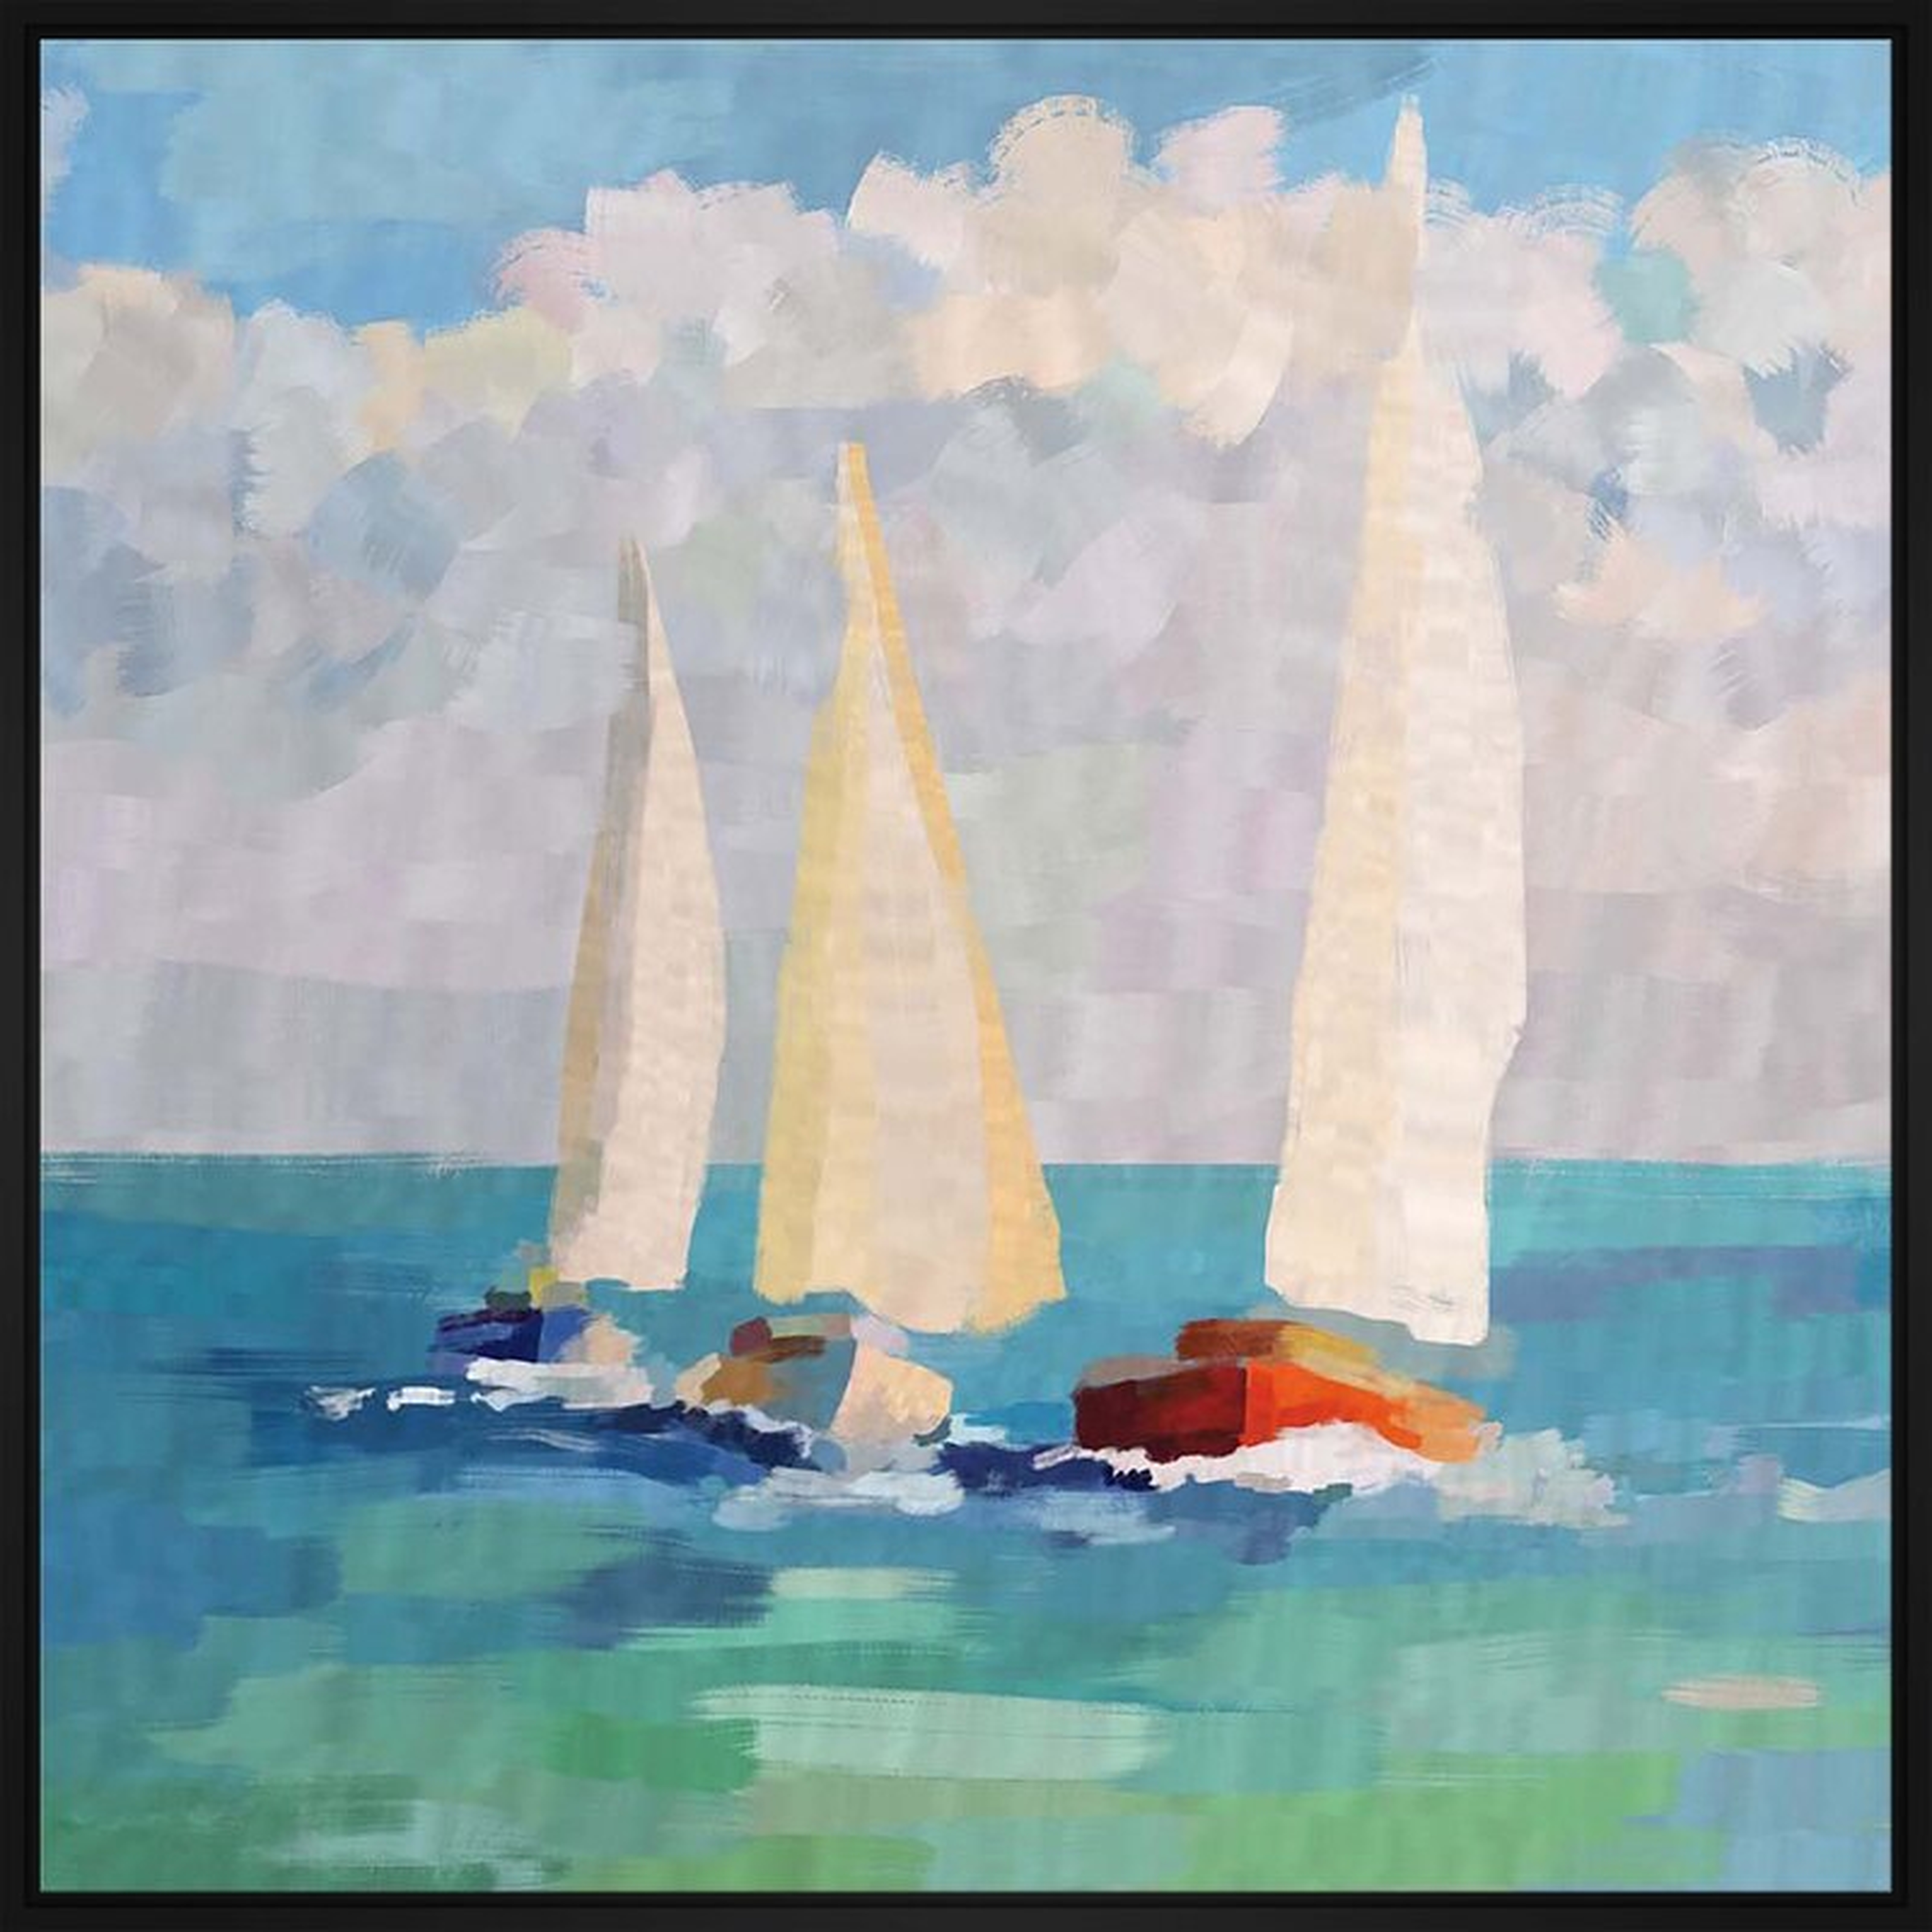 JBass Grand Gallery Collection The Three Boats - Picture Frame Painting on Canvas - Perigold